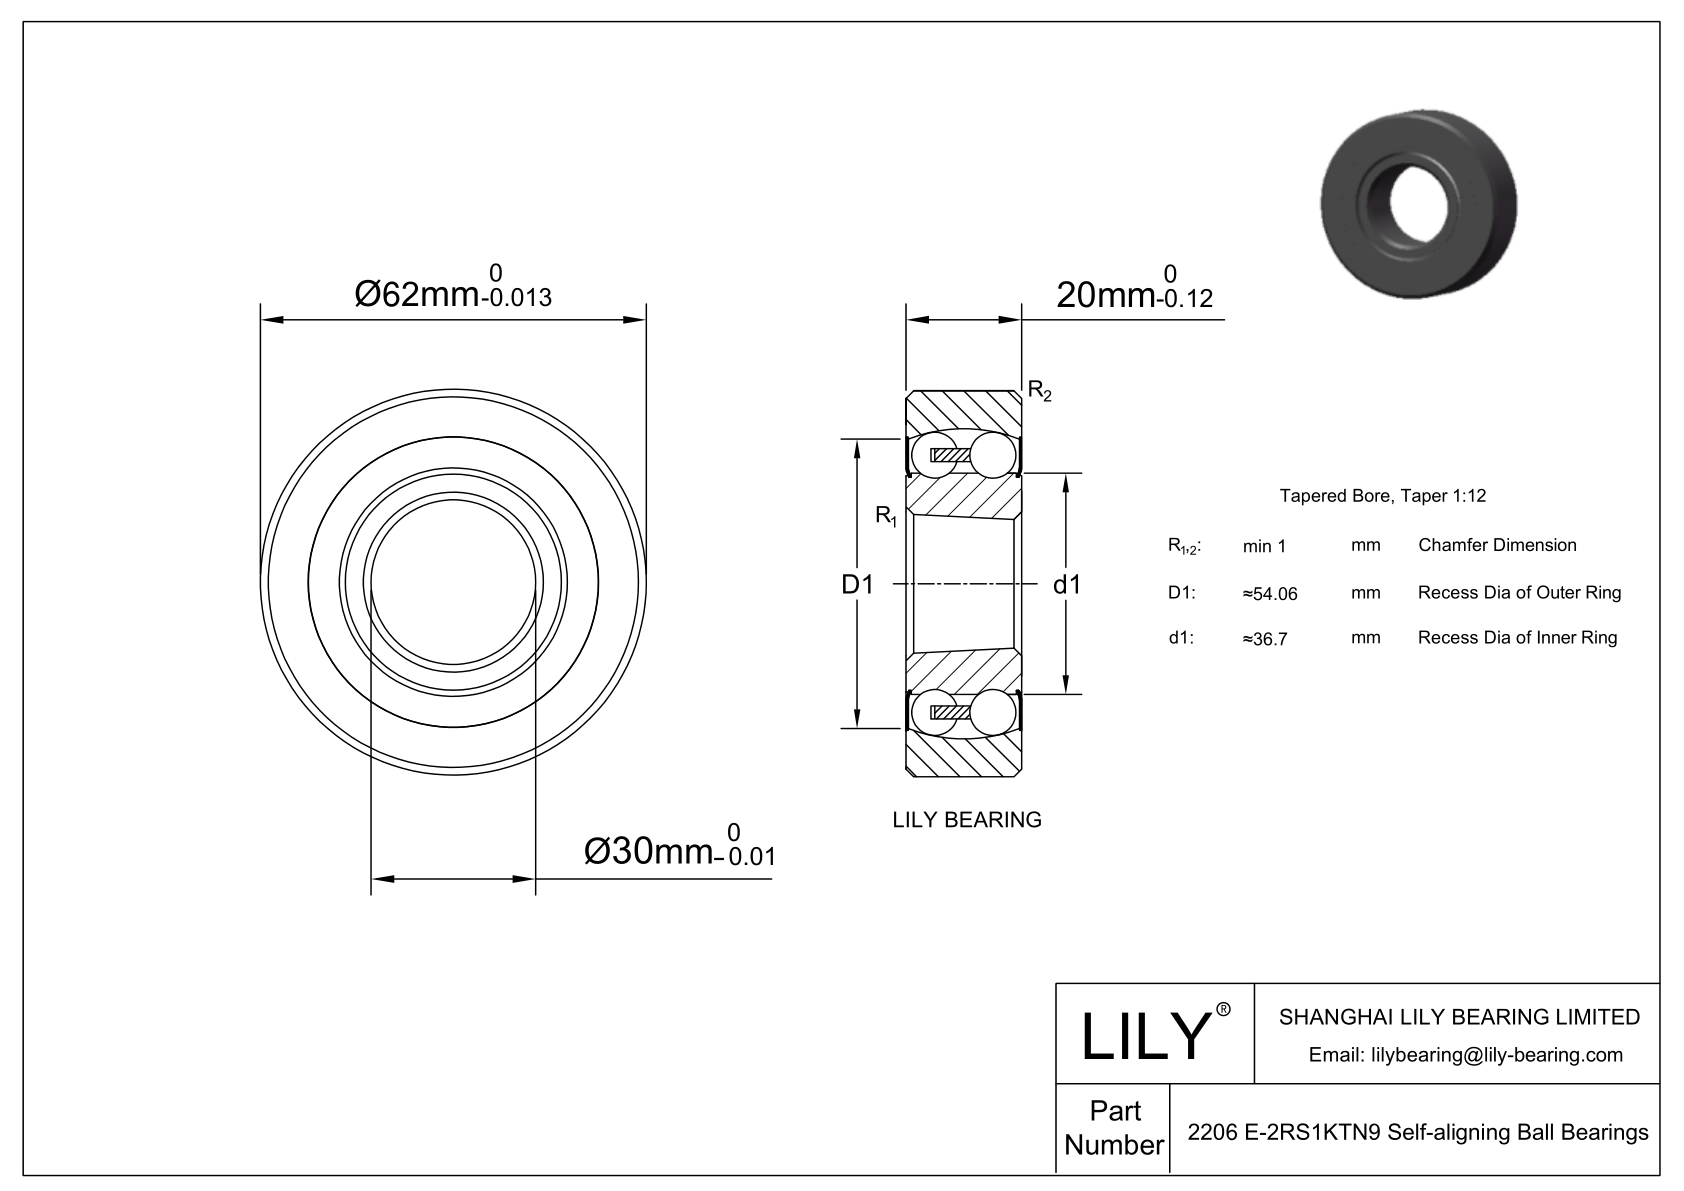 S2206 E-2RS1KTN9 Stainless Steel Self Aligning Ball Bearings cad drawing